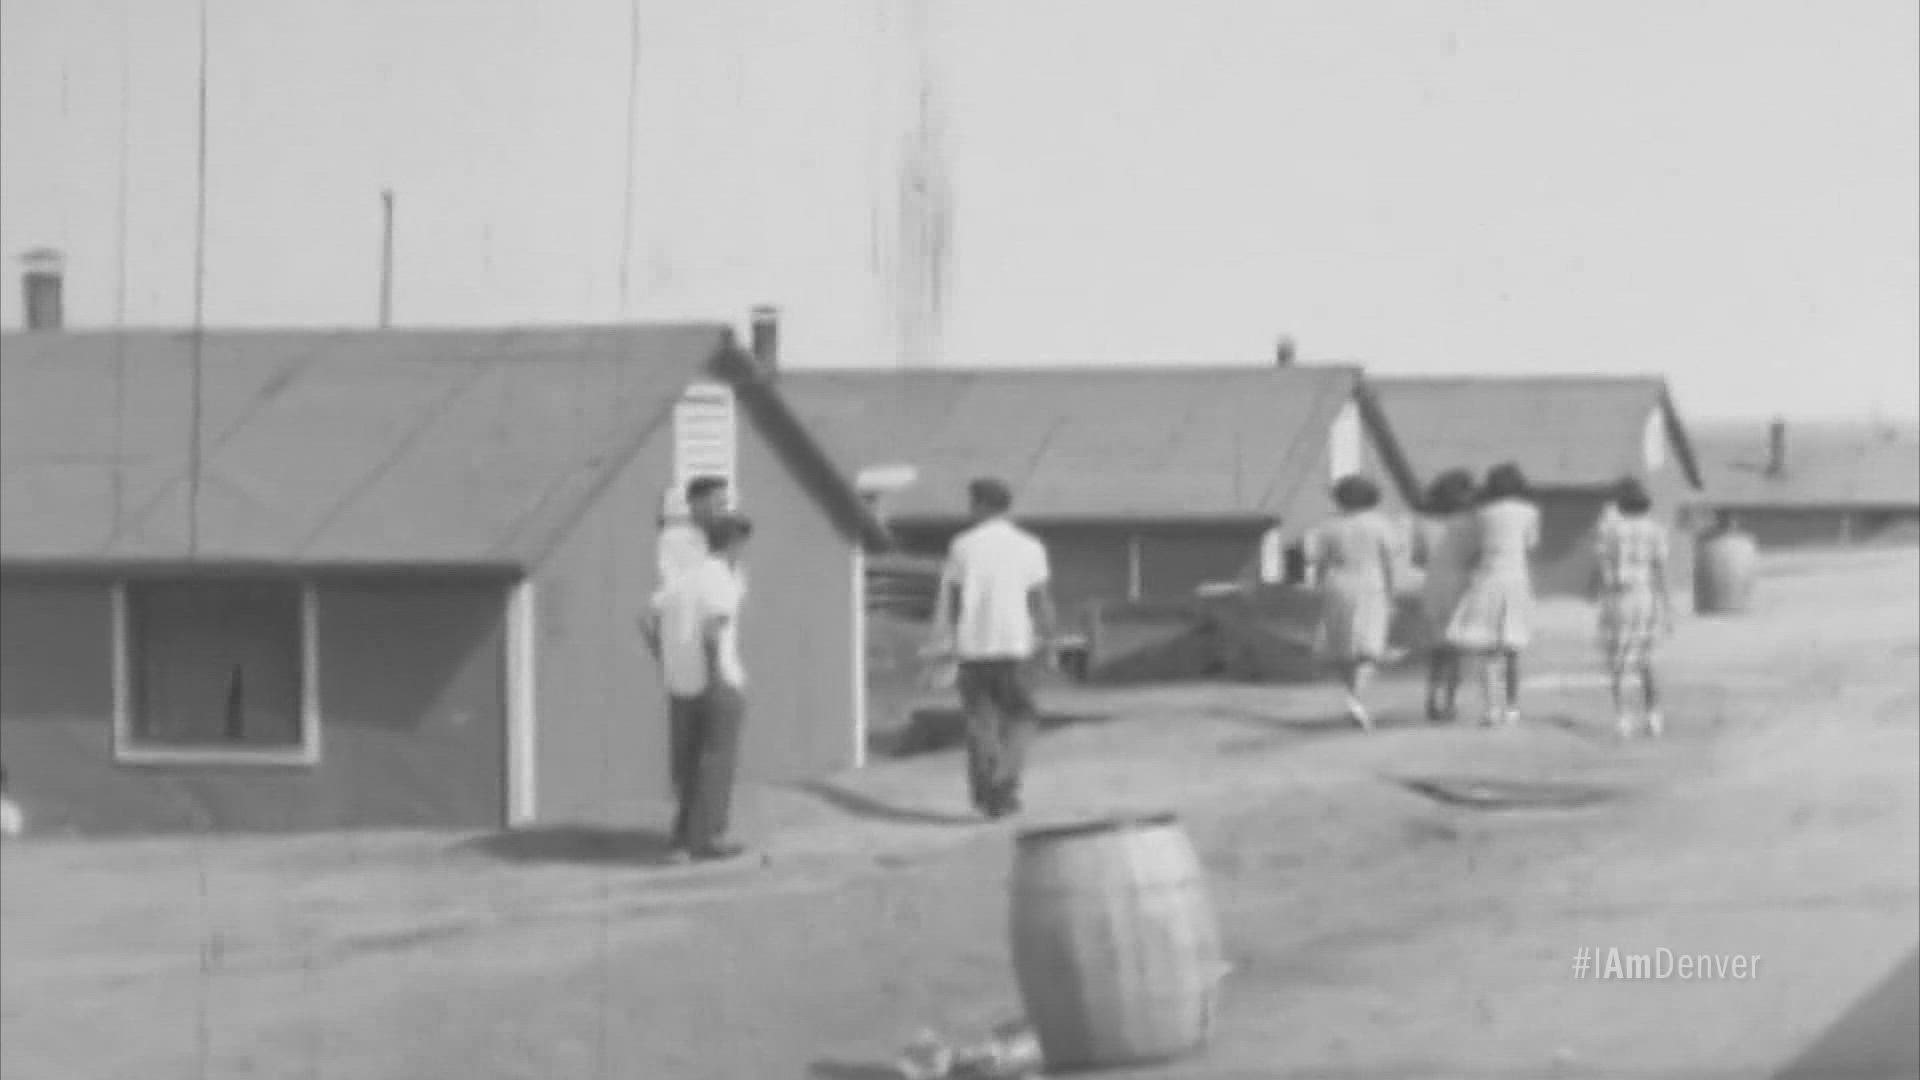 The documentary shows how Japanese Americans were forcibly sent to a confinement facility in southeastern Colorado during World War II, from  www.IamDenver.org